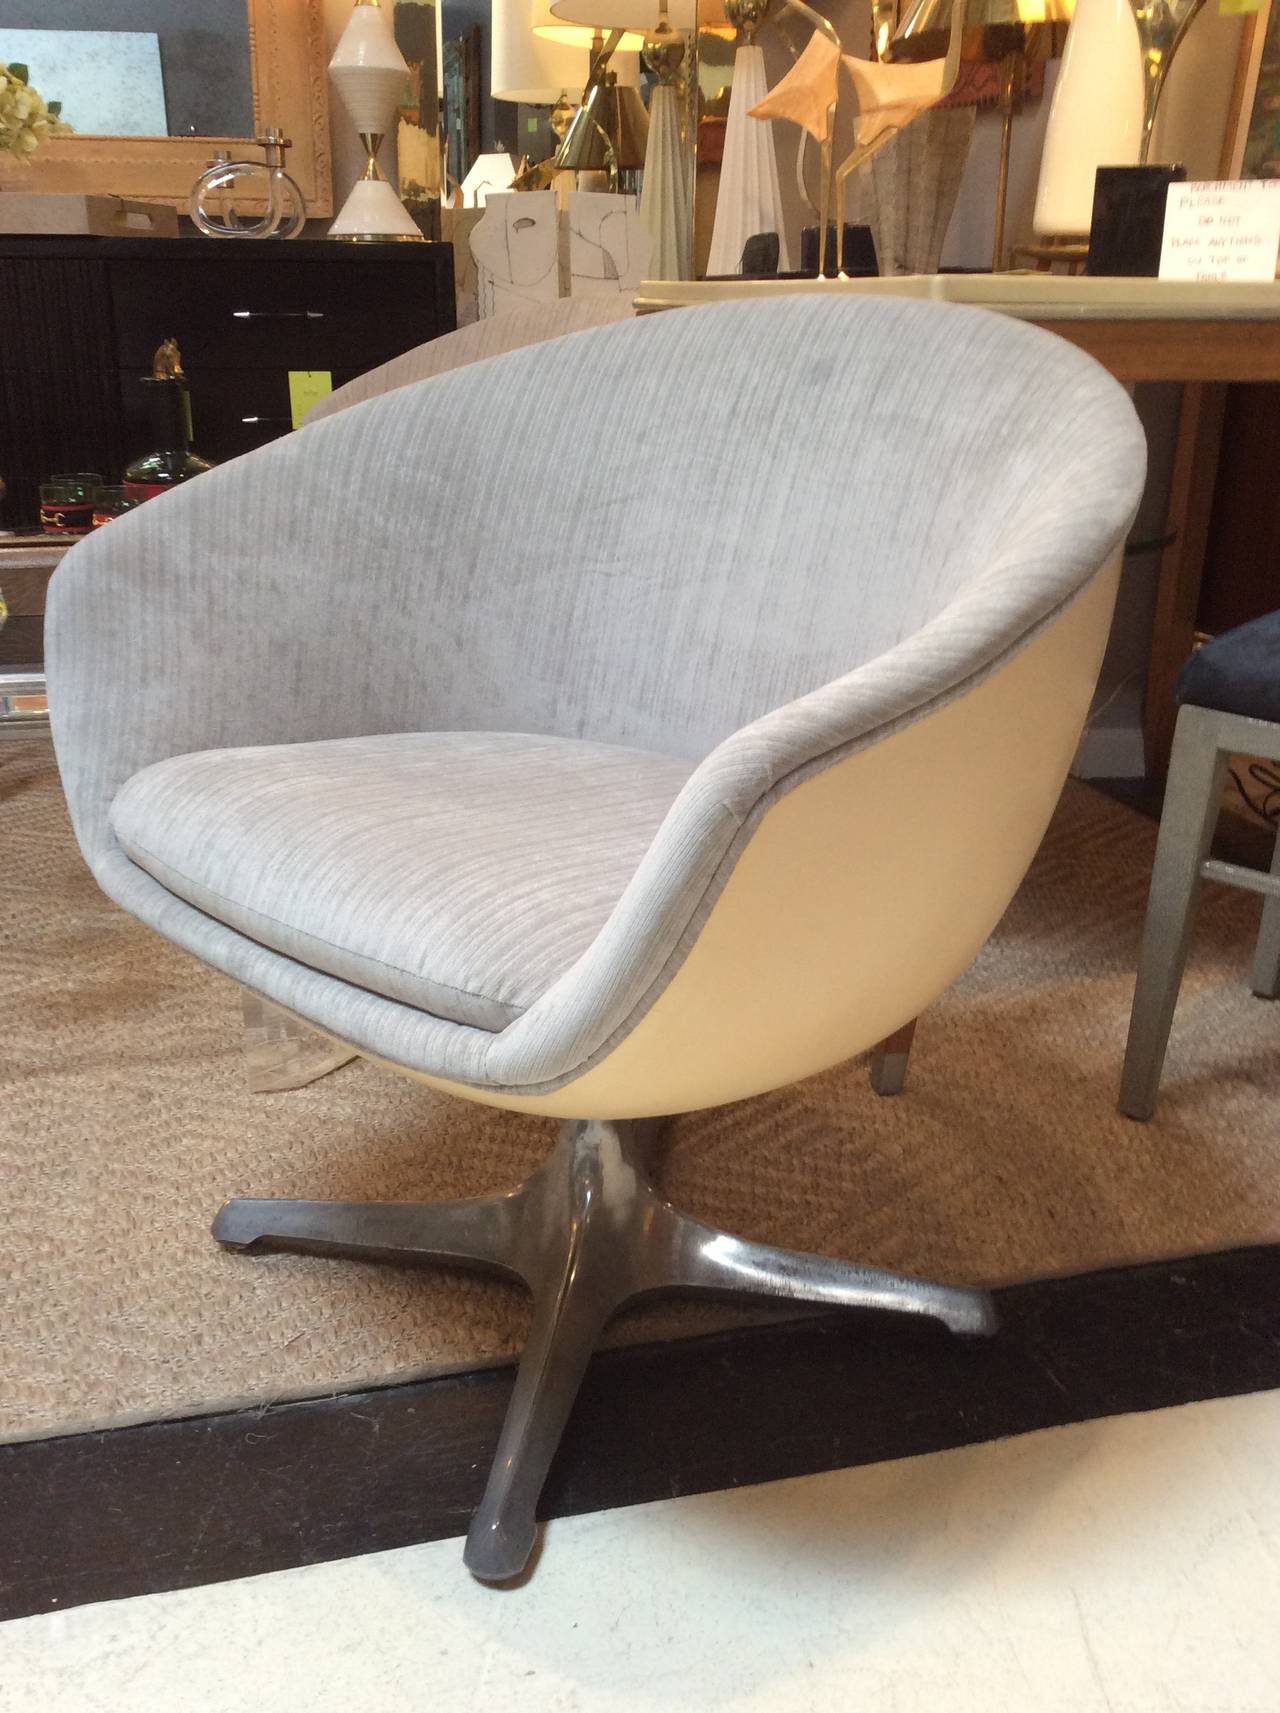 Extremely comfortable pair of 1960s pod chairs, newly upholstered in a dove gray striped velvet, with heavy aluminum propeller bases. Easy 360 degree swivel.